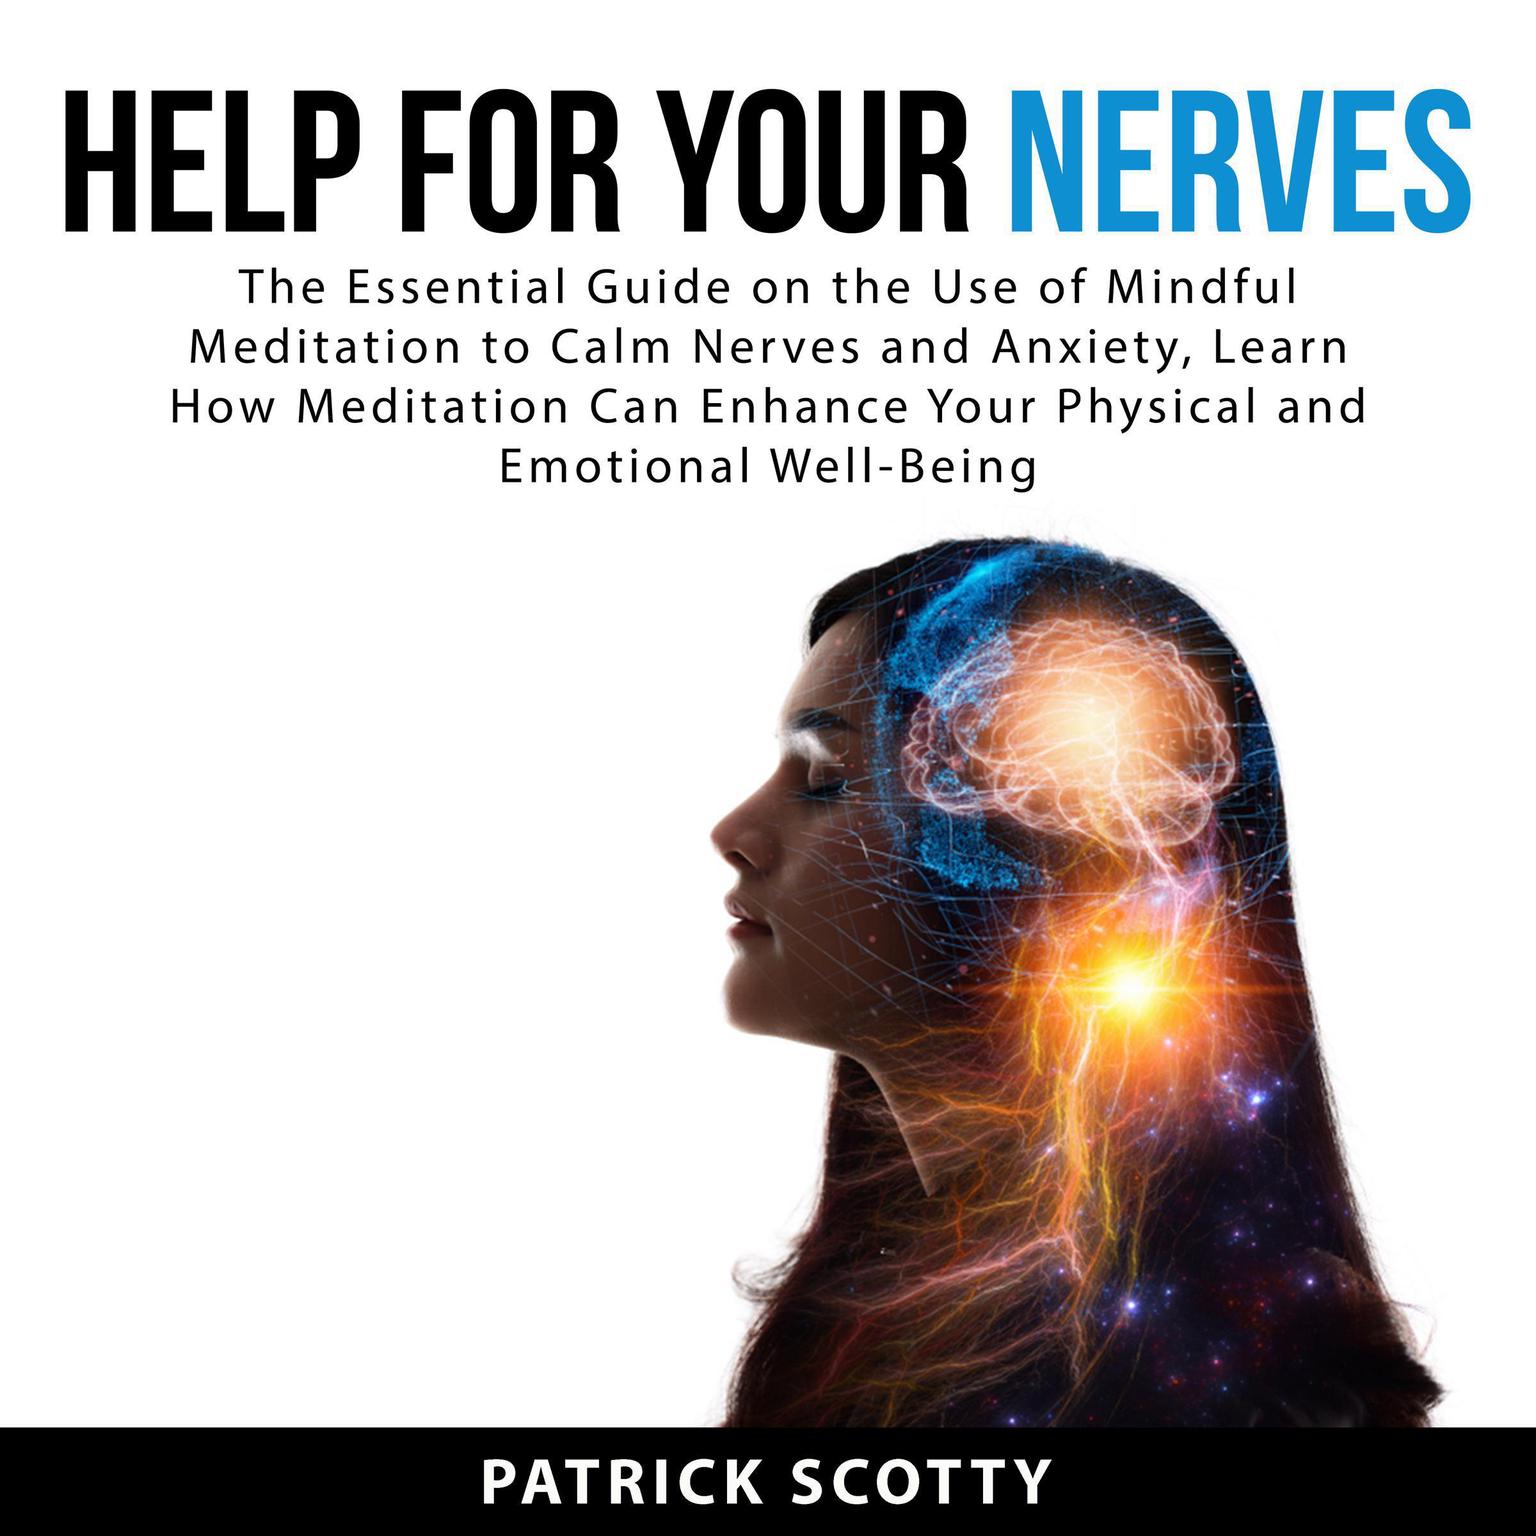 Help For Your Nerves: The Essential Guide on the Use of Mindful Meditation to Calm Nerves and Anxiety, Learn How Meditation Can Enhance Your Physical and Emotional Well-Being Audiobook, by Patrick Scotty